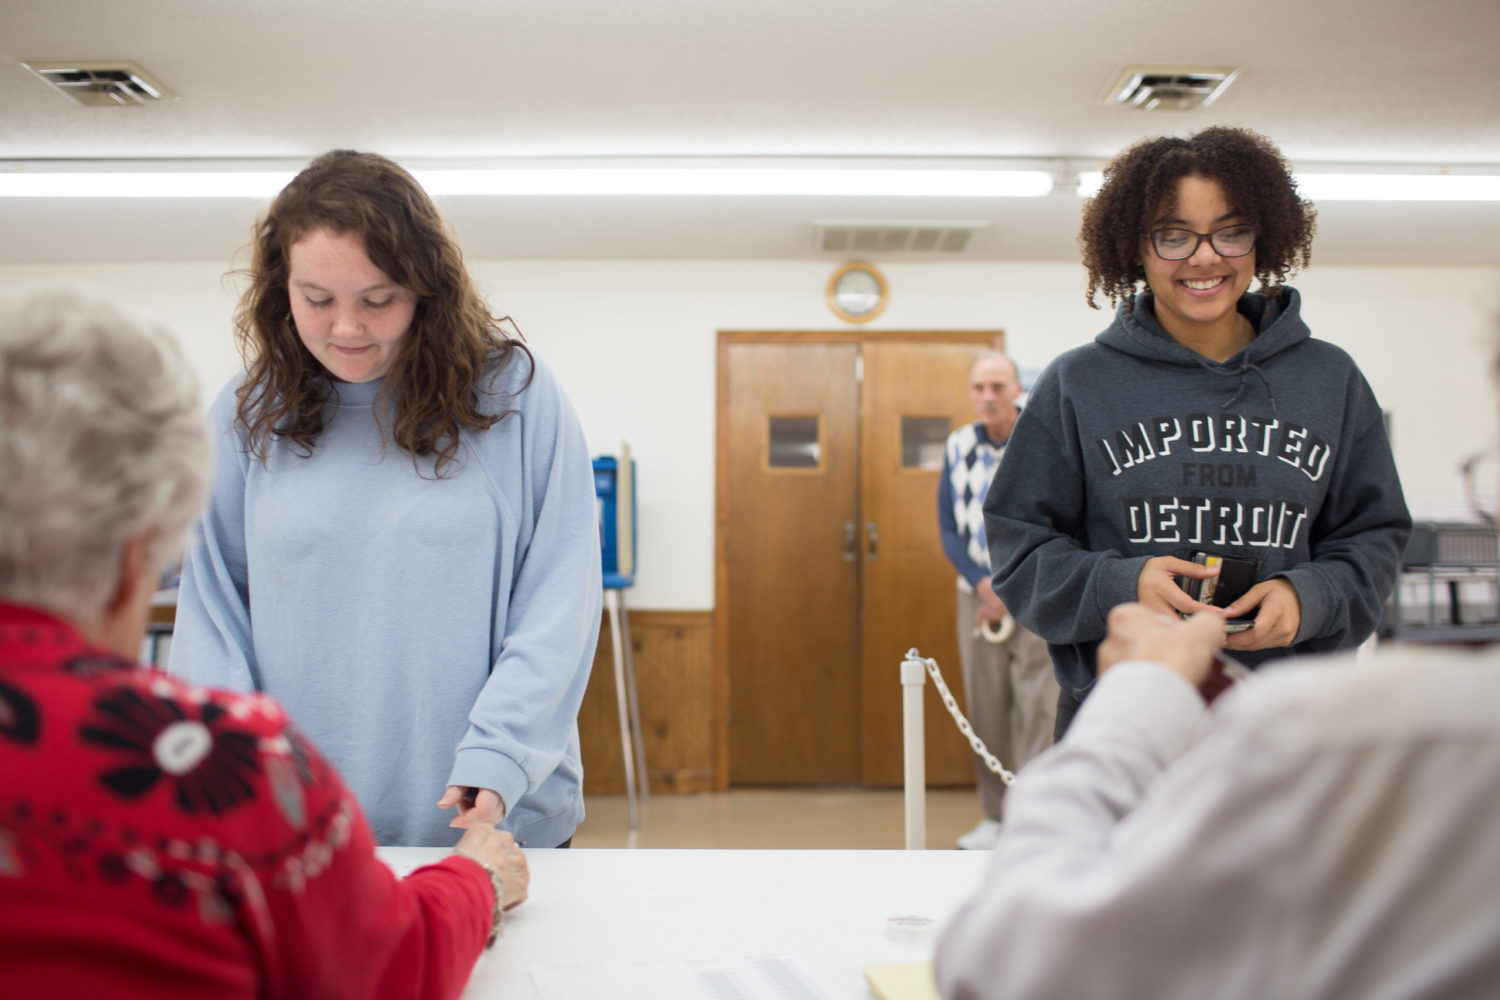 Lanie Hamrick, left, and Destinee Terry, both students at Asheville-Buncombe Technical Community College, check in to pick up their primary election ballots at the Old Fort Wesleyan Church polling place in McDowell County on March 3, 2020. Colby Rabon / Carolina Public Press